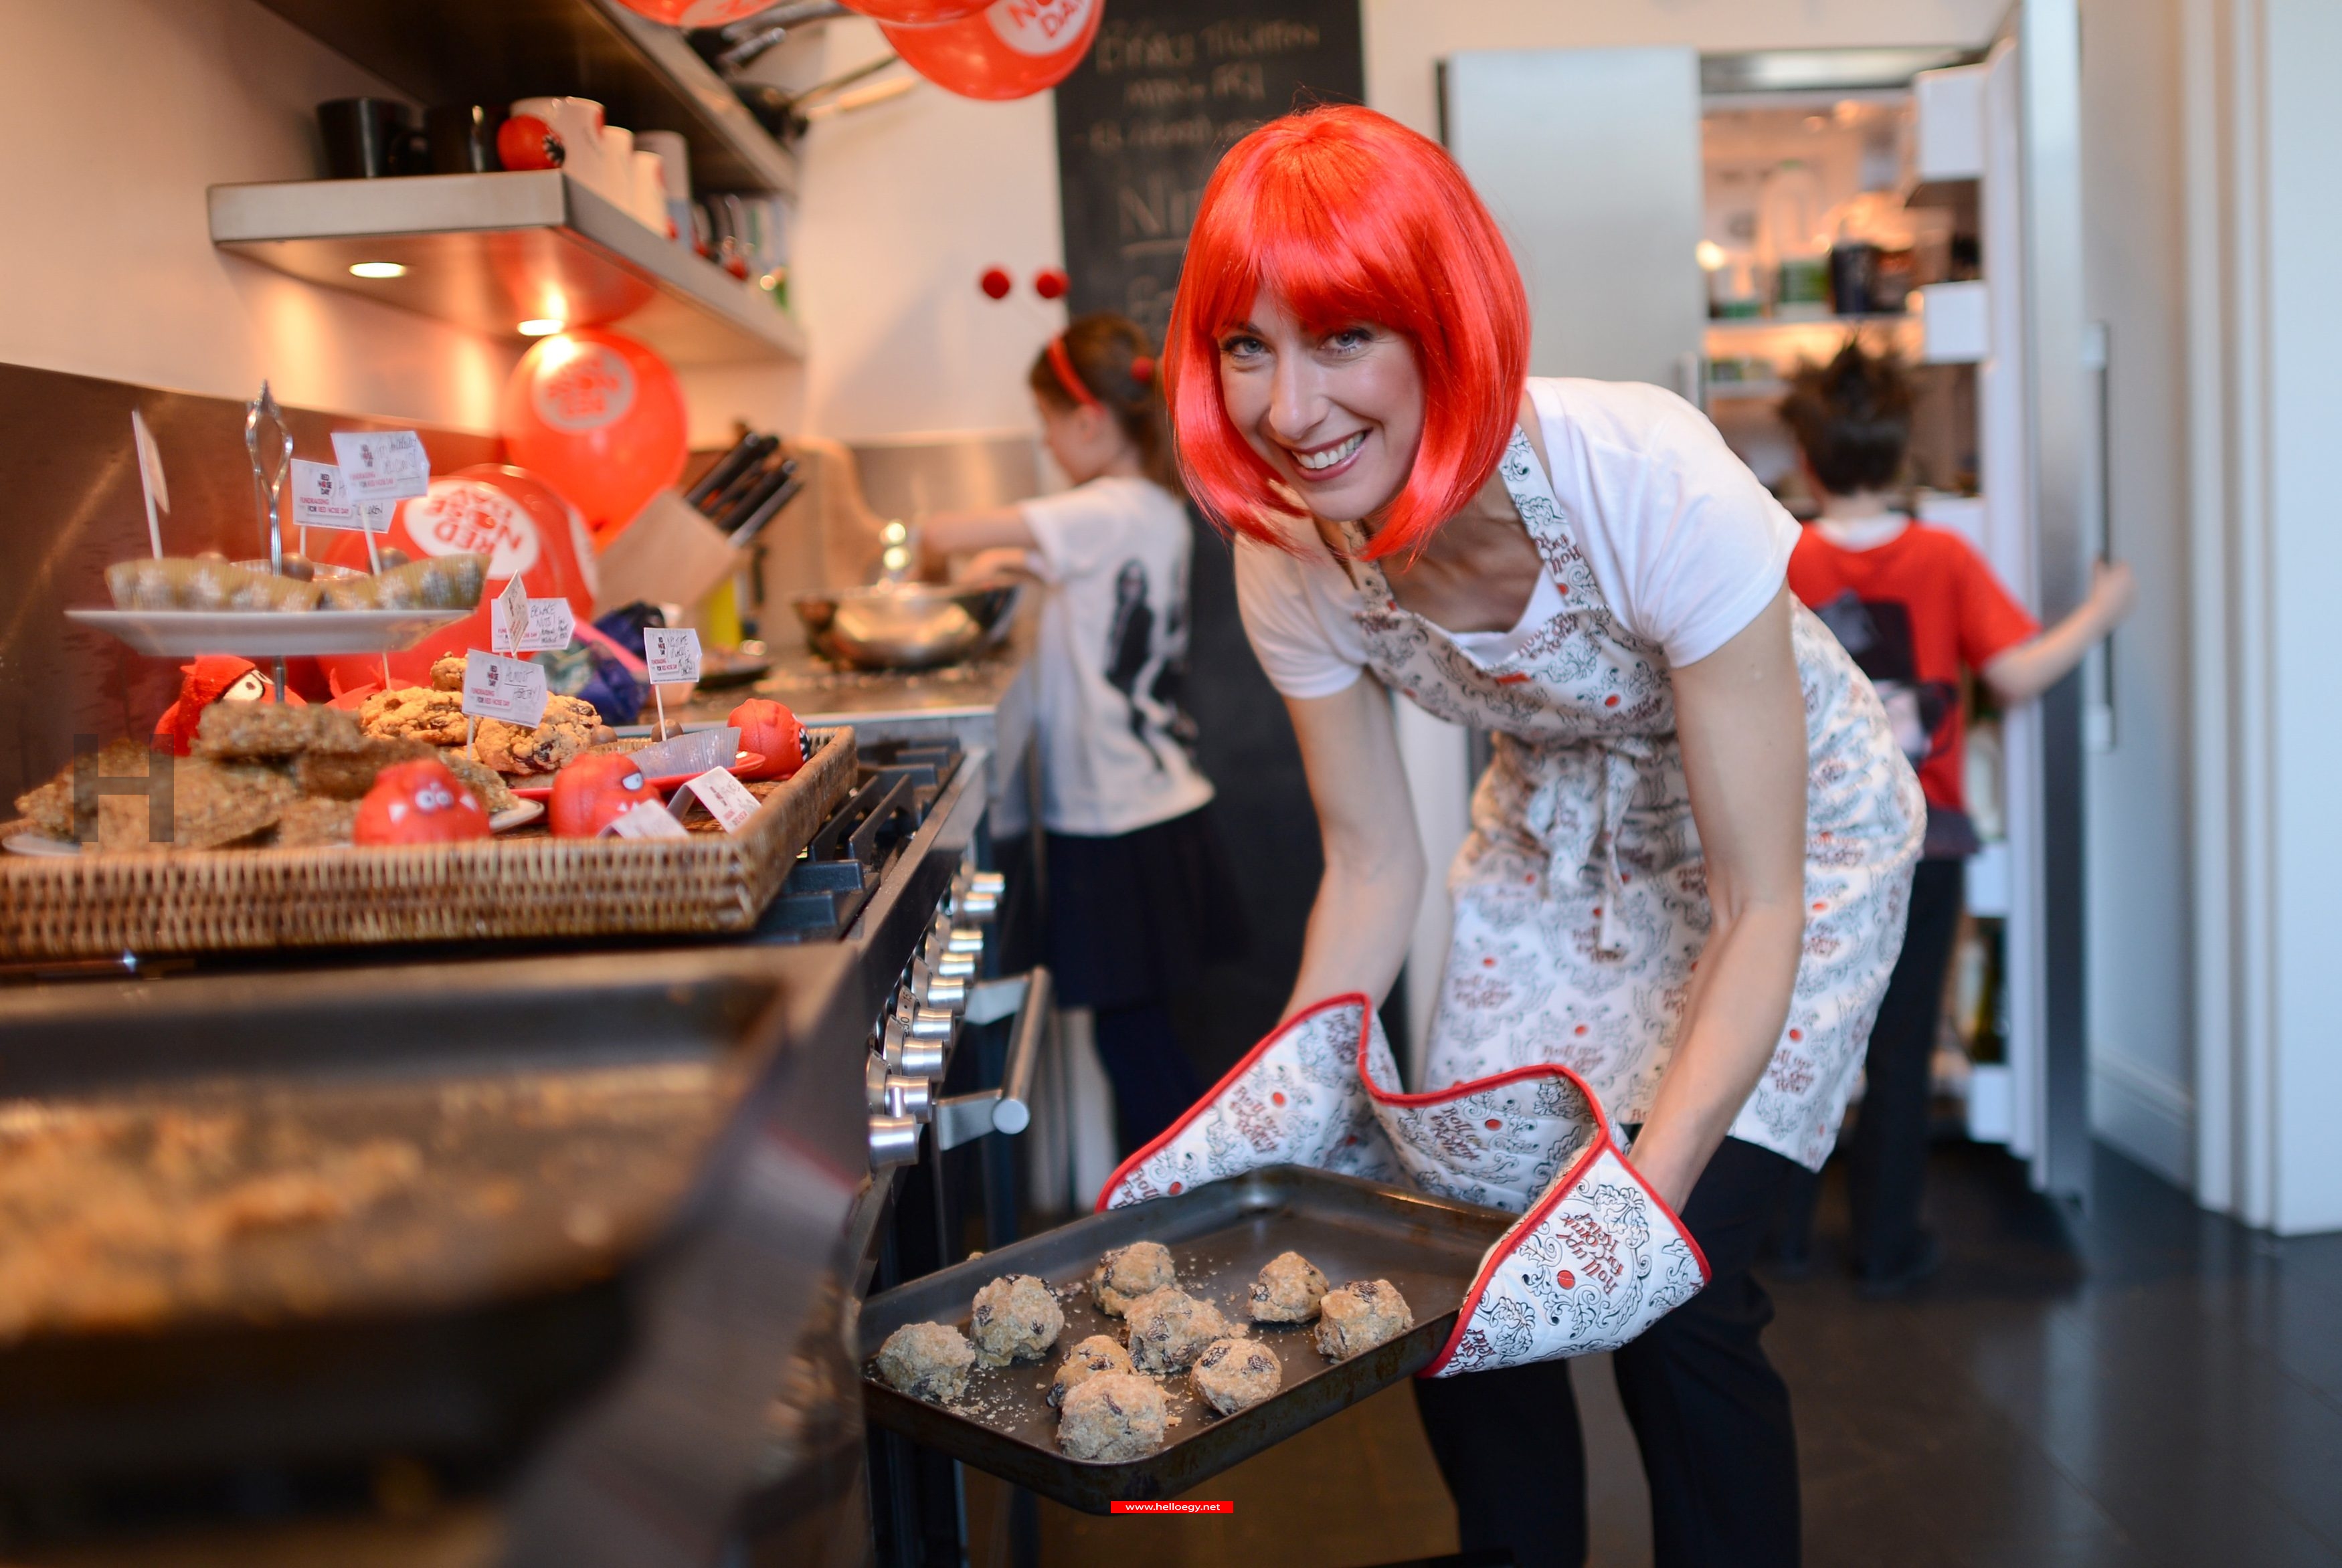 Samantha Cameron Wears A Red Wig And Bakes Cakes For Comic Relief